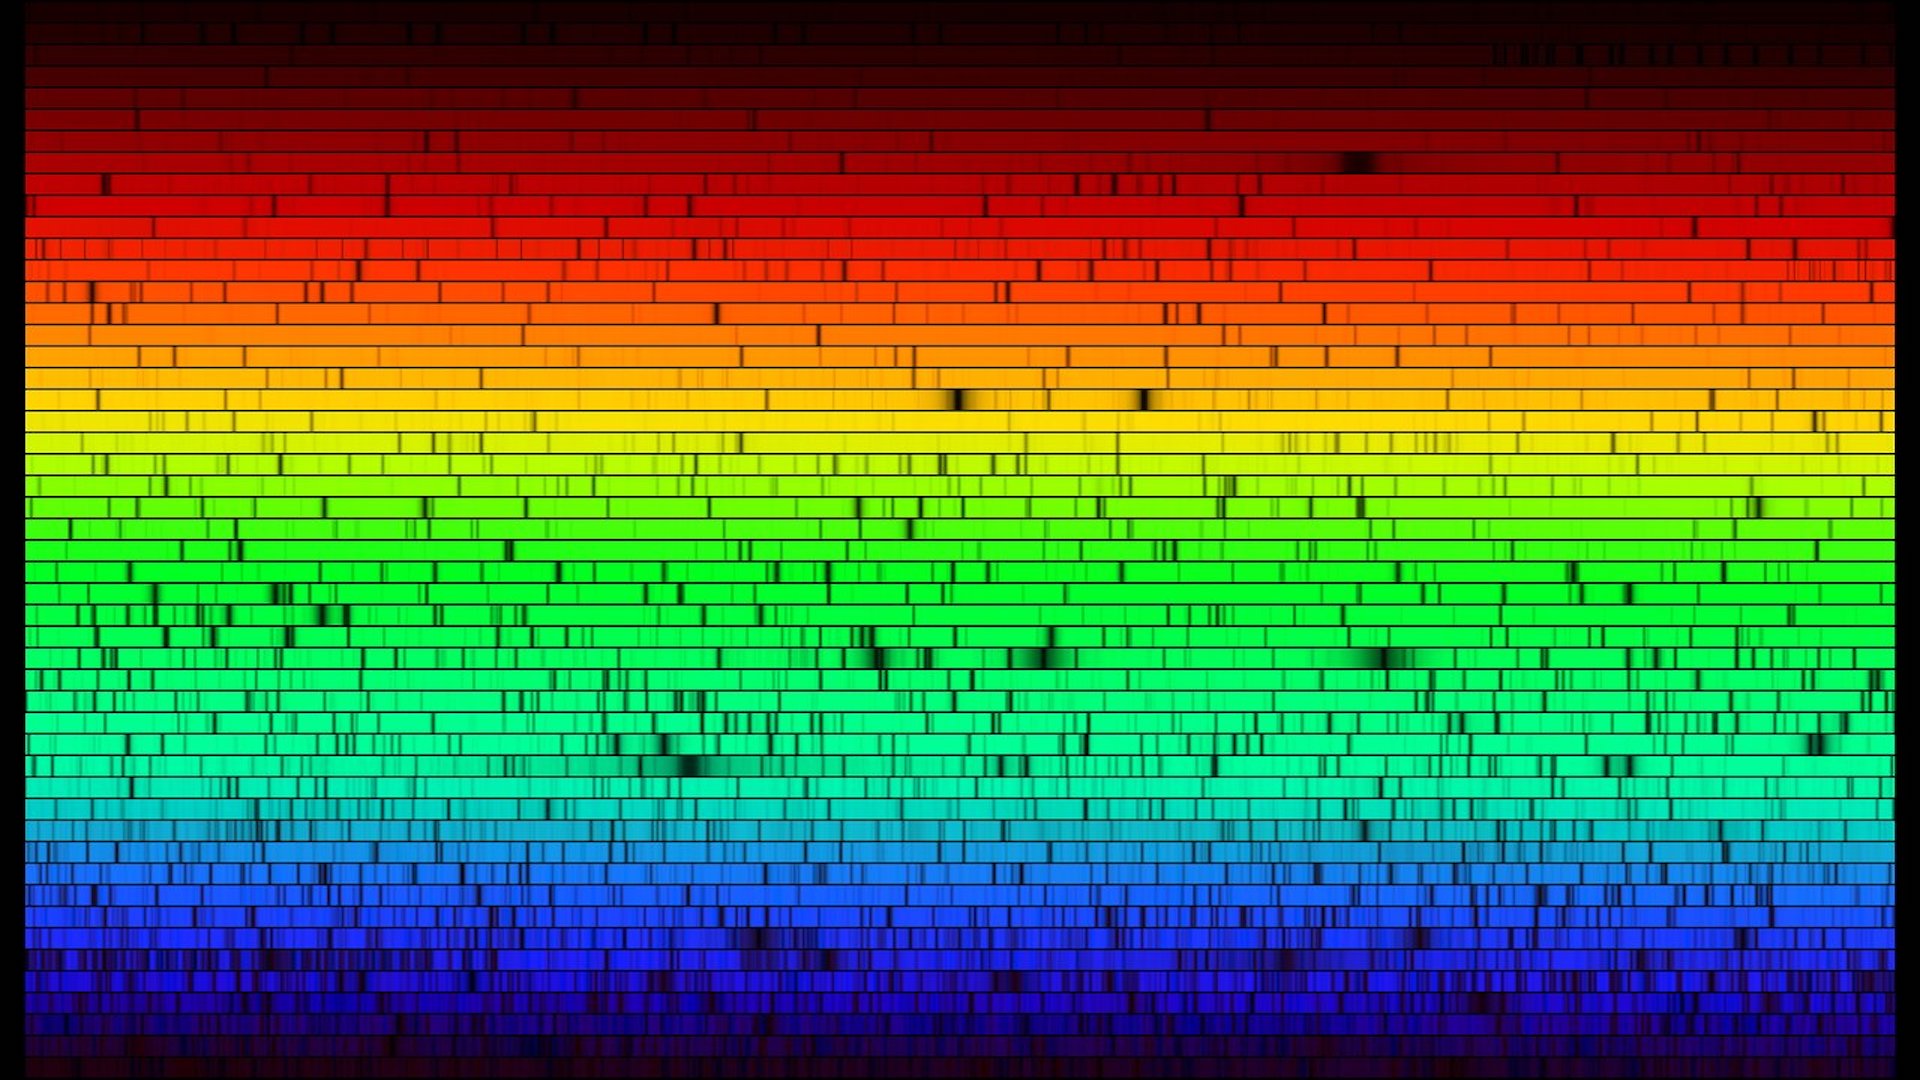 rainbow of brightly colored bars with small black lines through them